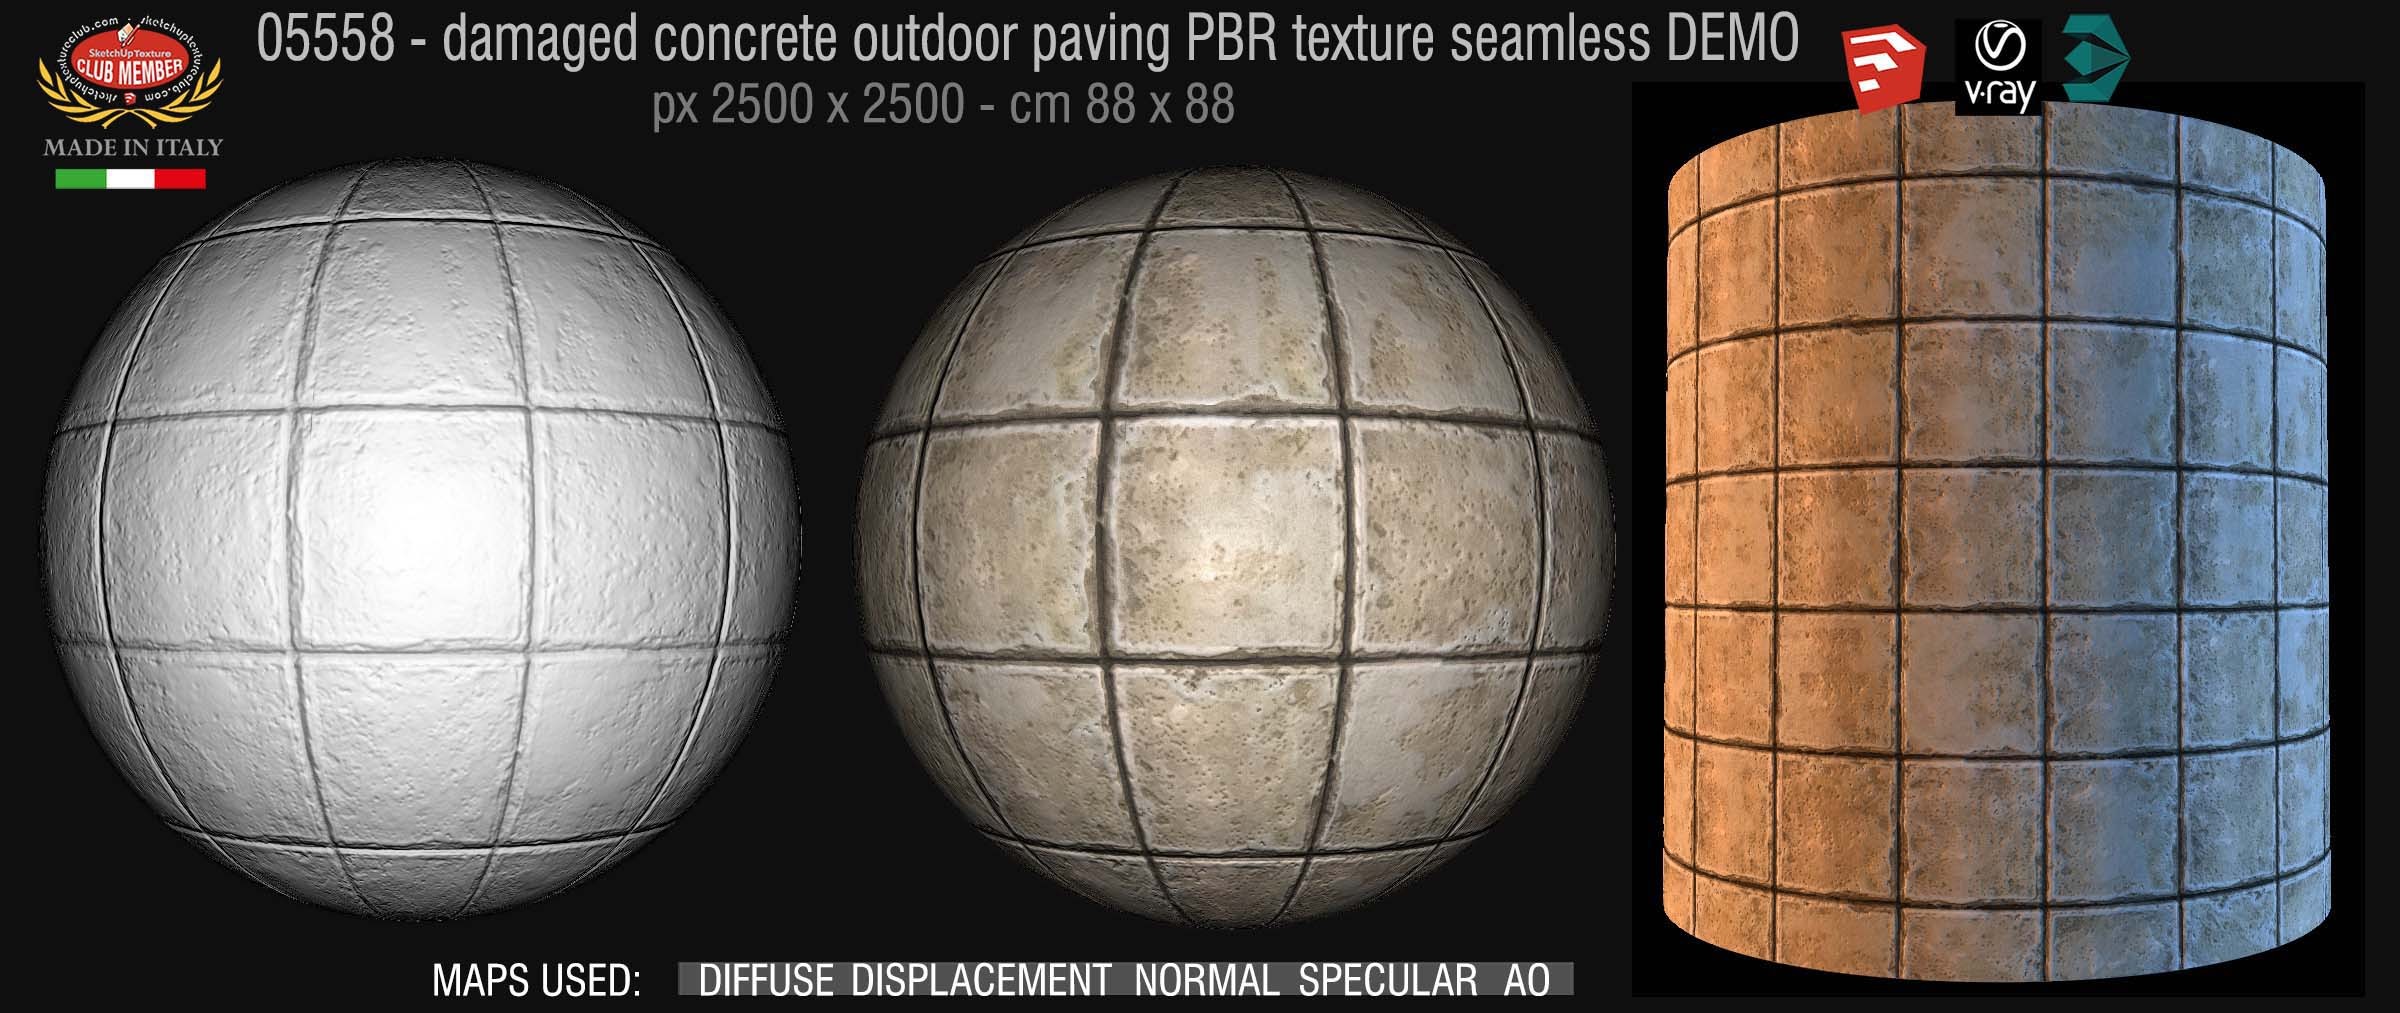 05558 Damaged concrete outdoor paving PBR texture seamless DEMO